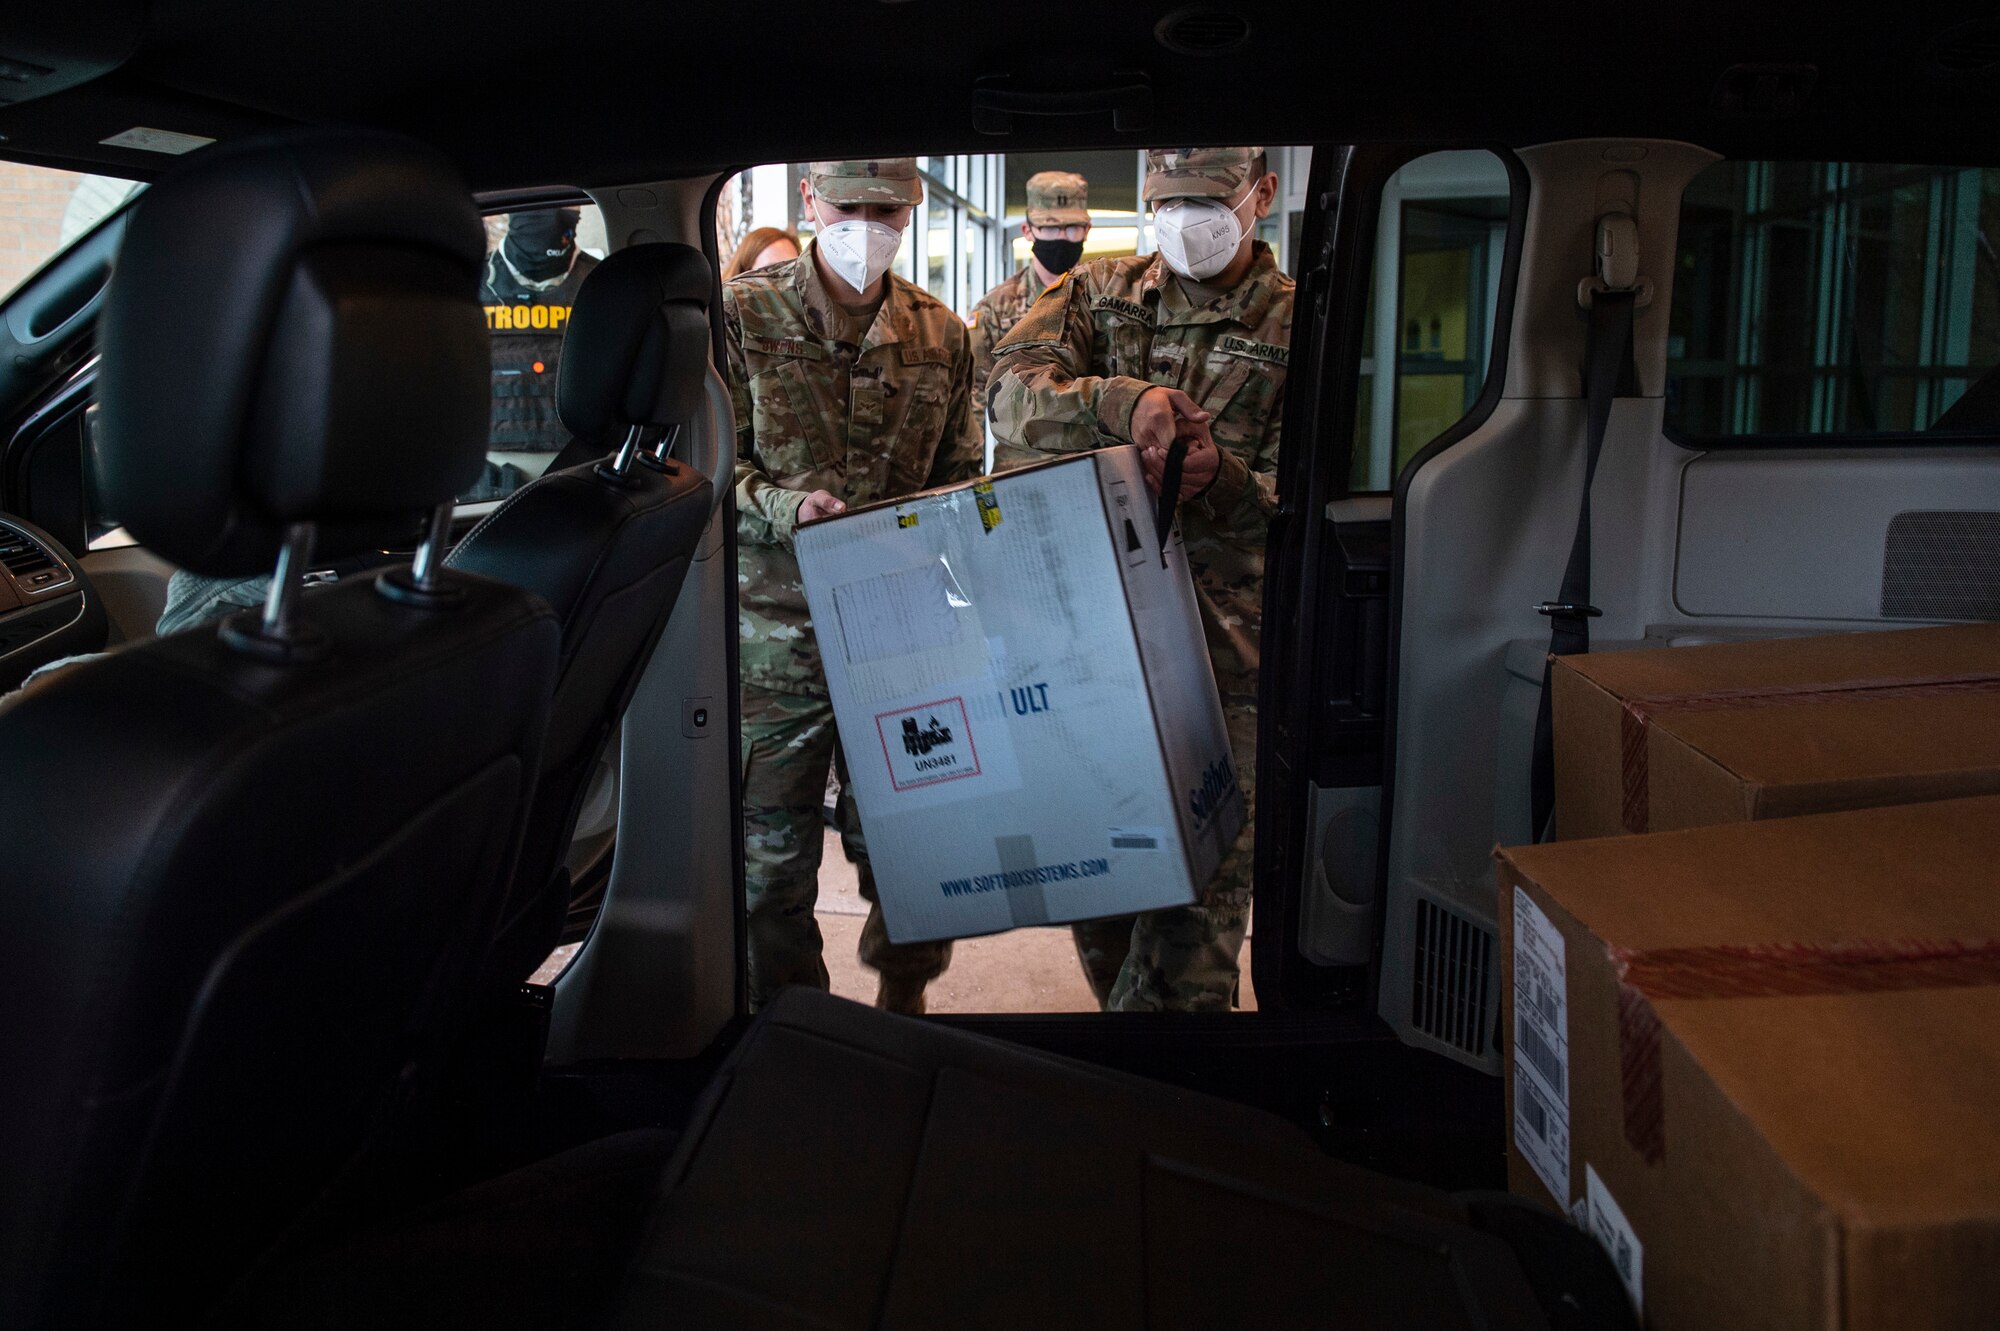 Spc. Martin Gamarra (right) and Airman 1st Class Andreas Owens (left) load a box containing COVID-19 vaccinations into  the vehicles the Guard members will use to transport the vaccines to sites across the state, Dec. 15, 2020.

On December 15, Guardsmen are transporting the first two boxes of vaccines to be distributed from one of five centralized hubs supporting 11 satellite locations across Oklahoma. The Guardsmen will be using Oklahoma State Department of Health vehicles to transport the vaccines to the satellite locations with an escort from the Oklahoma Highway Patrol. (Oklahoma National Guard photo by Anthony Jones)